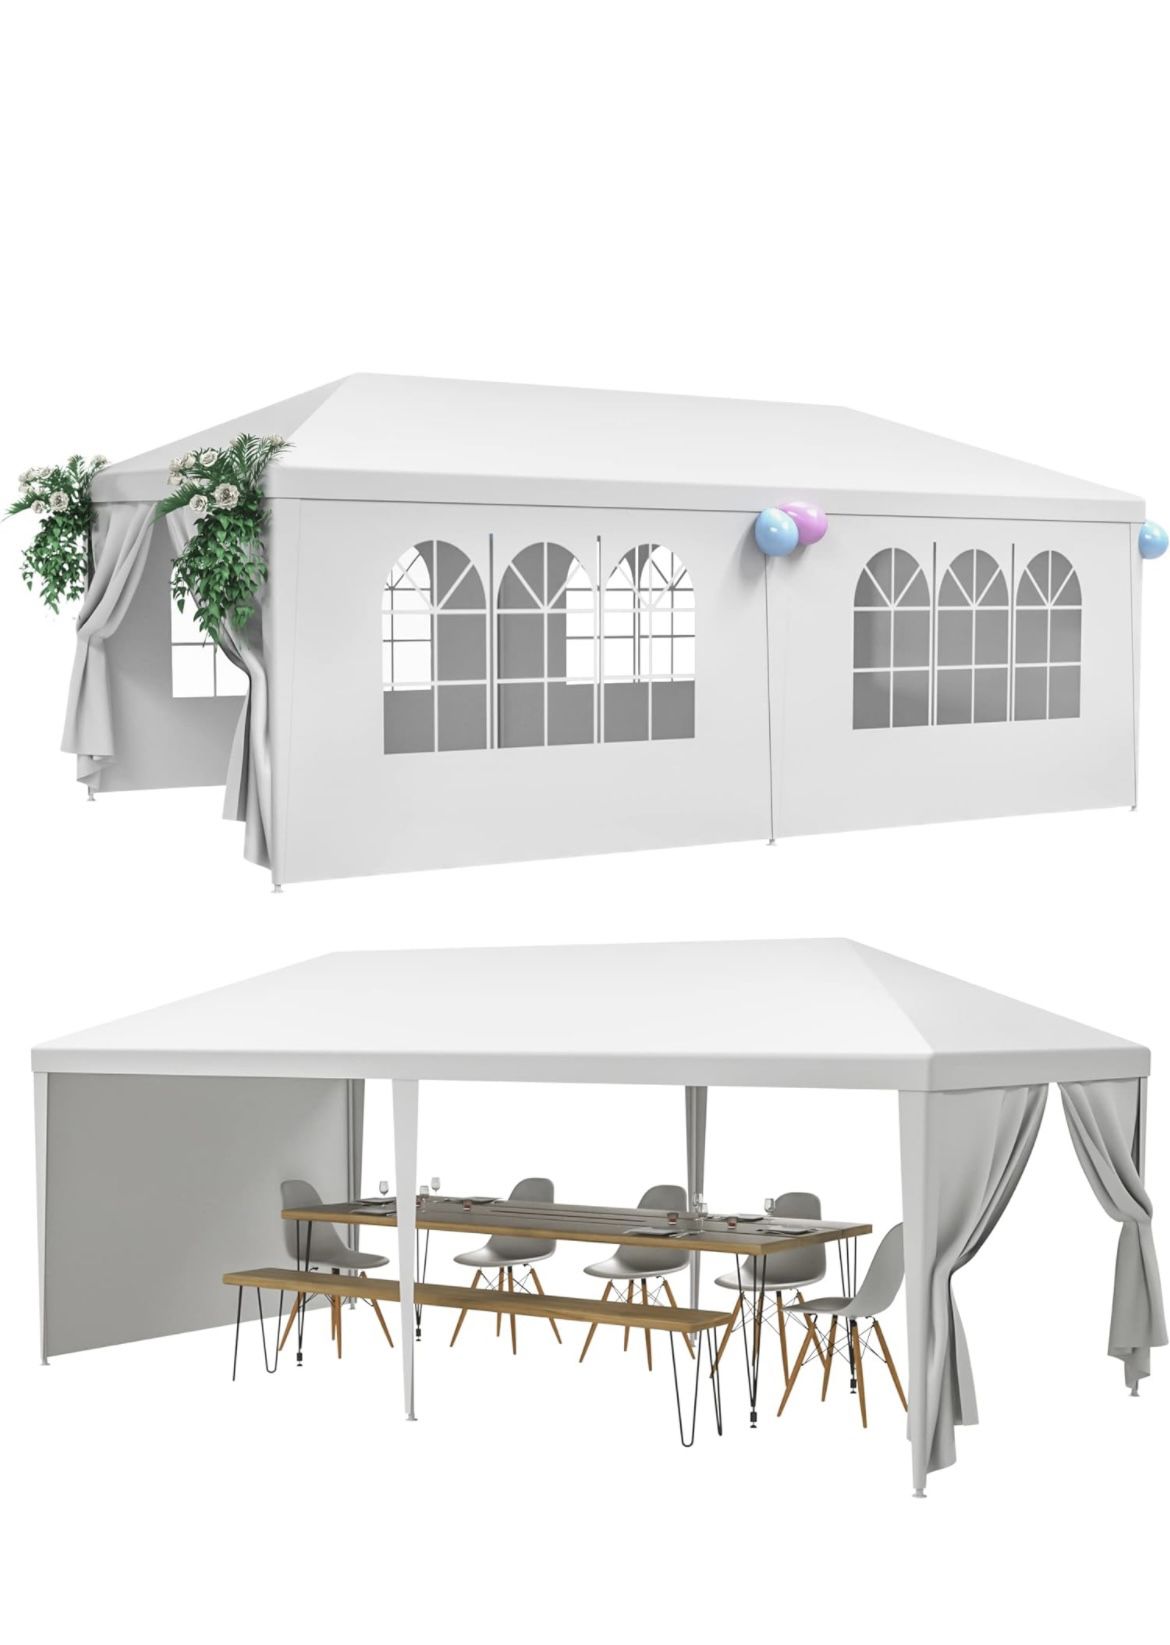 10x20 Canopy Tent For Events Park Wedding Birthday Graduation 10 Feet By 20 Feet 10’x20’  Removable Sides 4 Windows And Two Zipper Close Sides